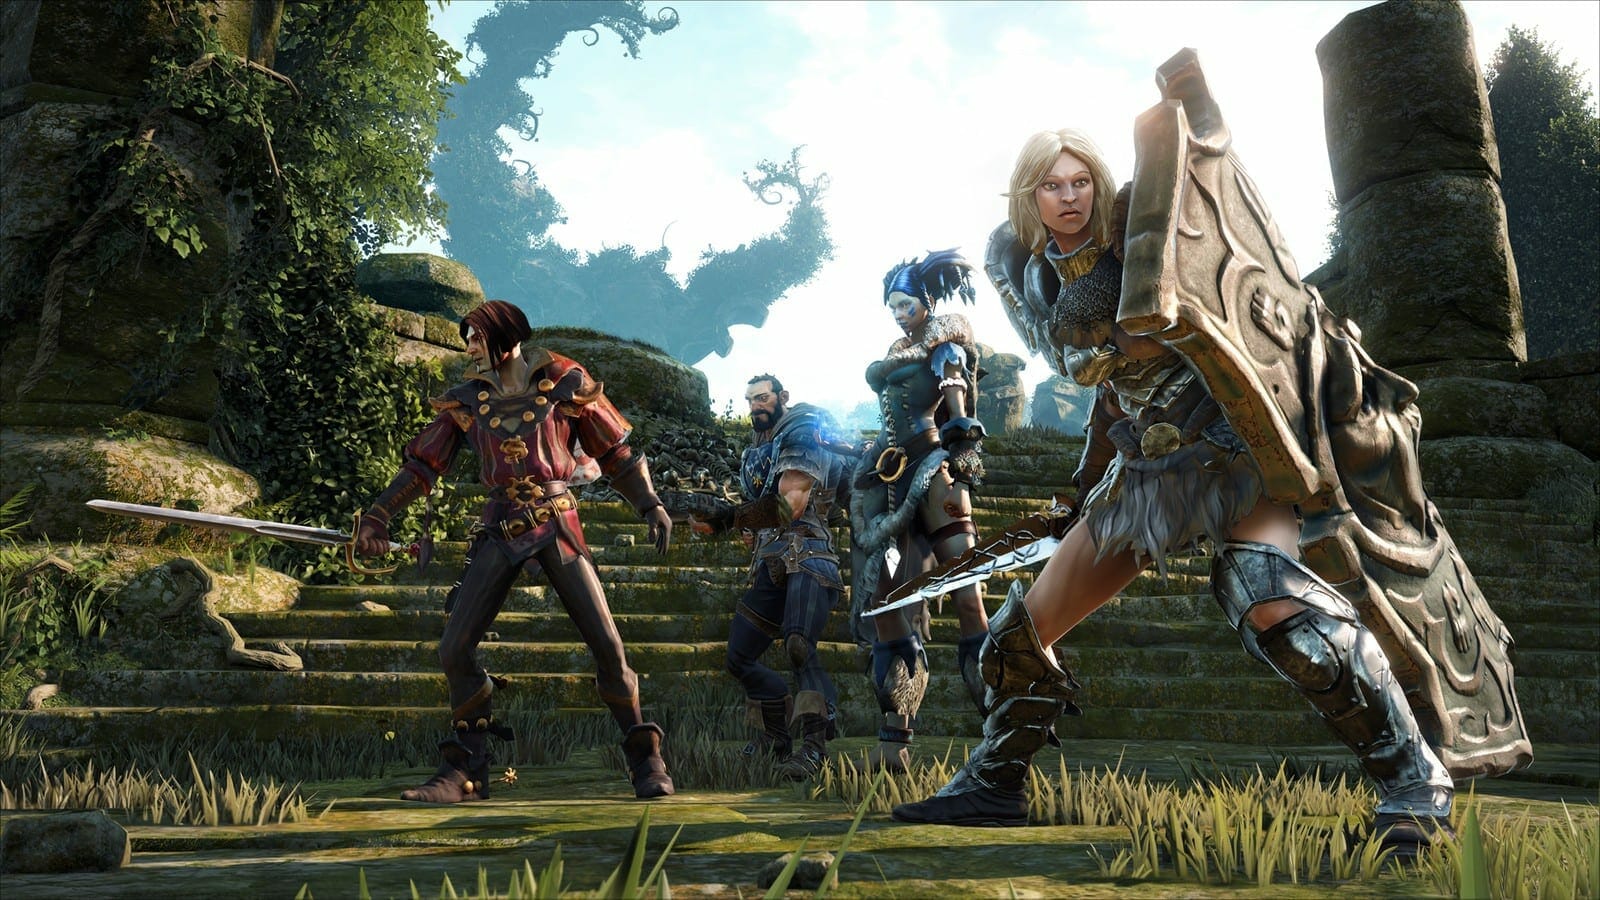 fable 4 soundtrack